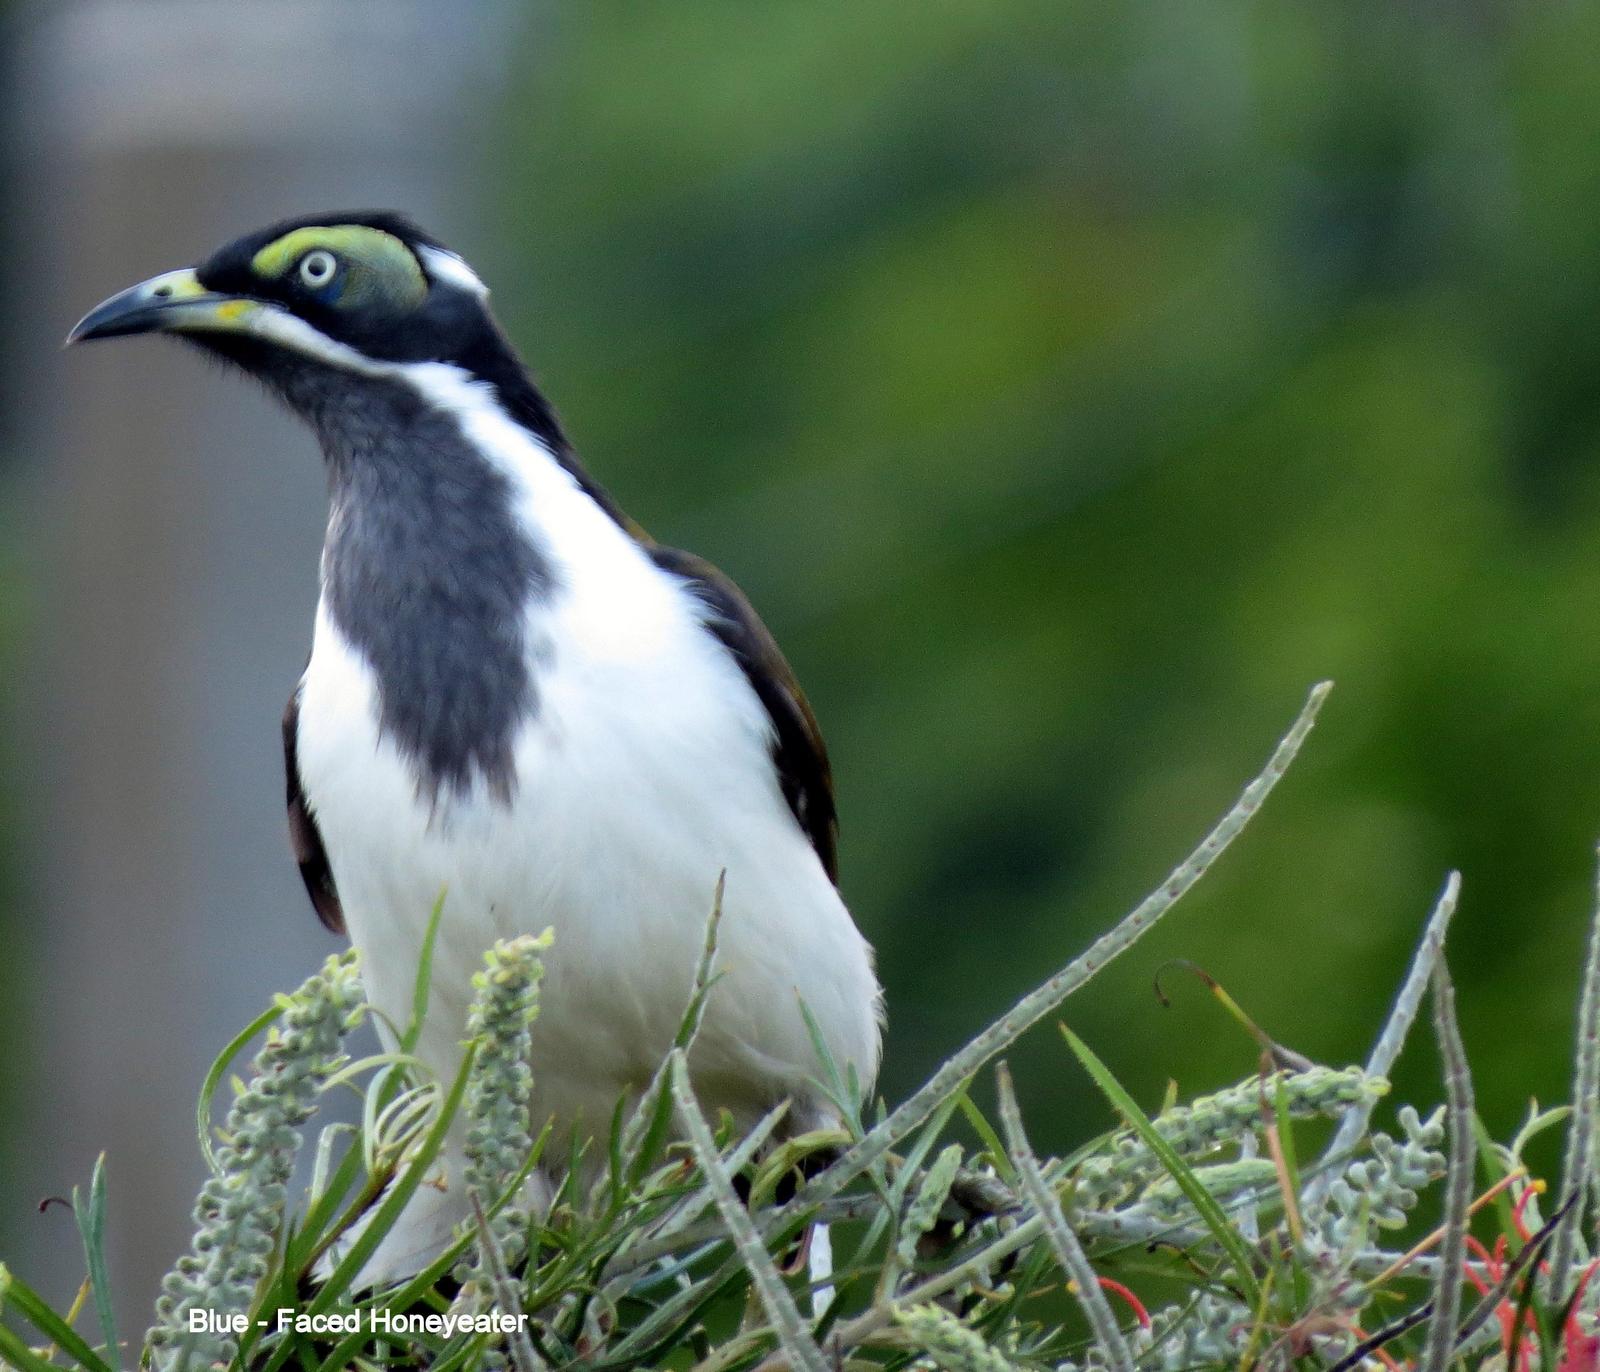 Blue-faced Honeyeater Photo by Richard  Lowe